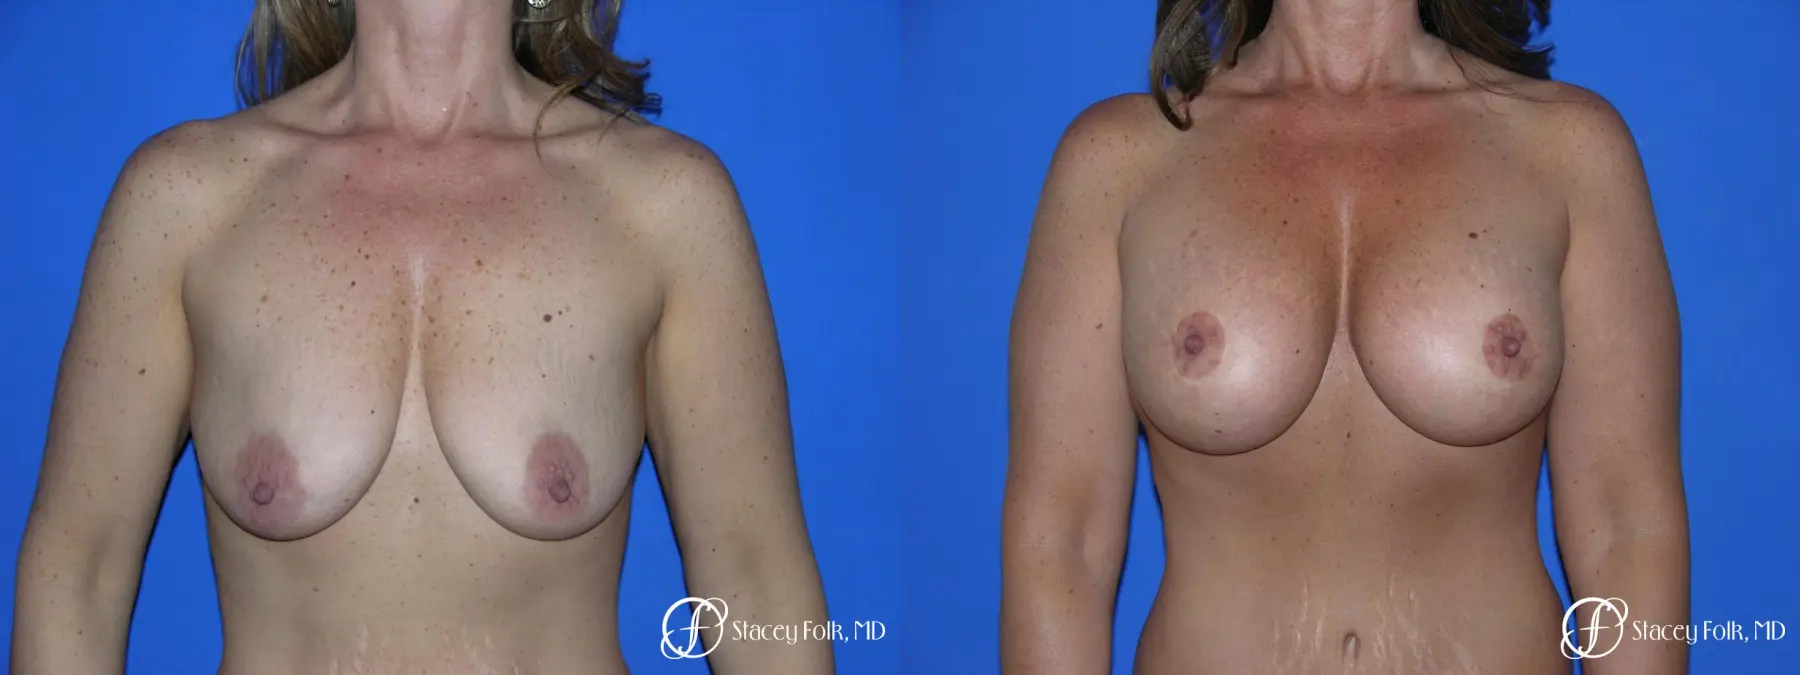 Denver Breast Lift and Augmentation 4560 - Before and After